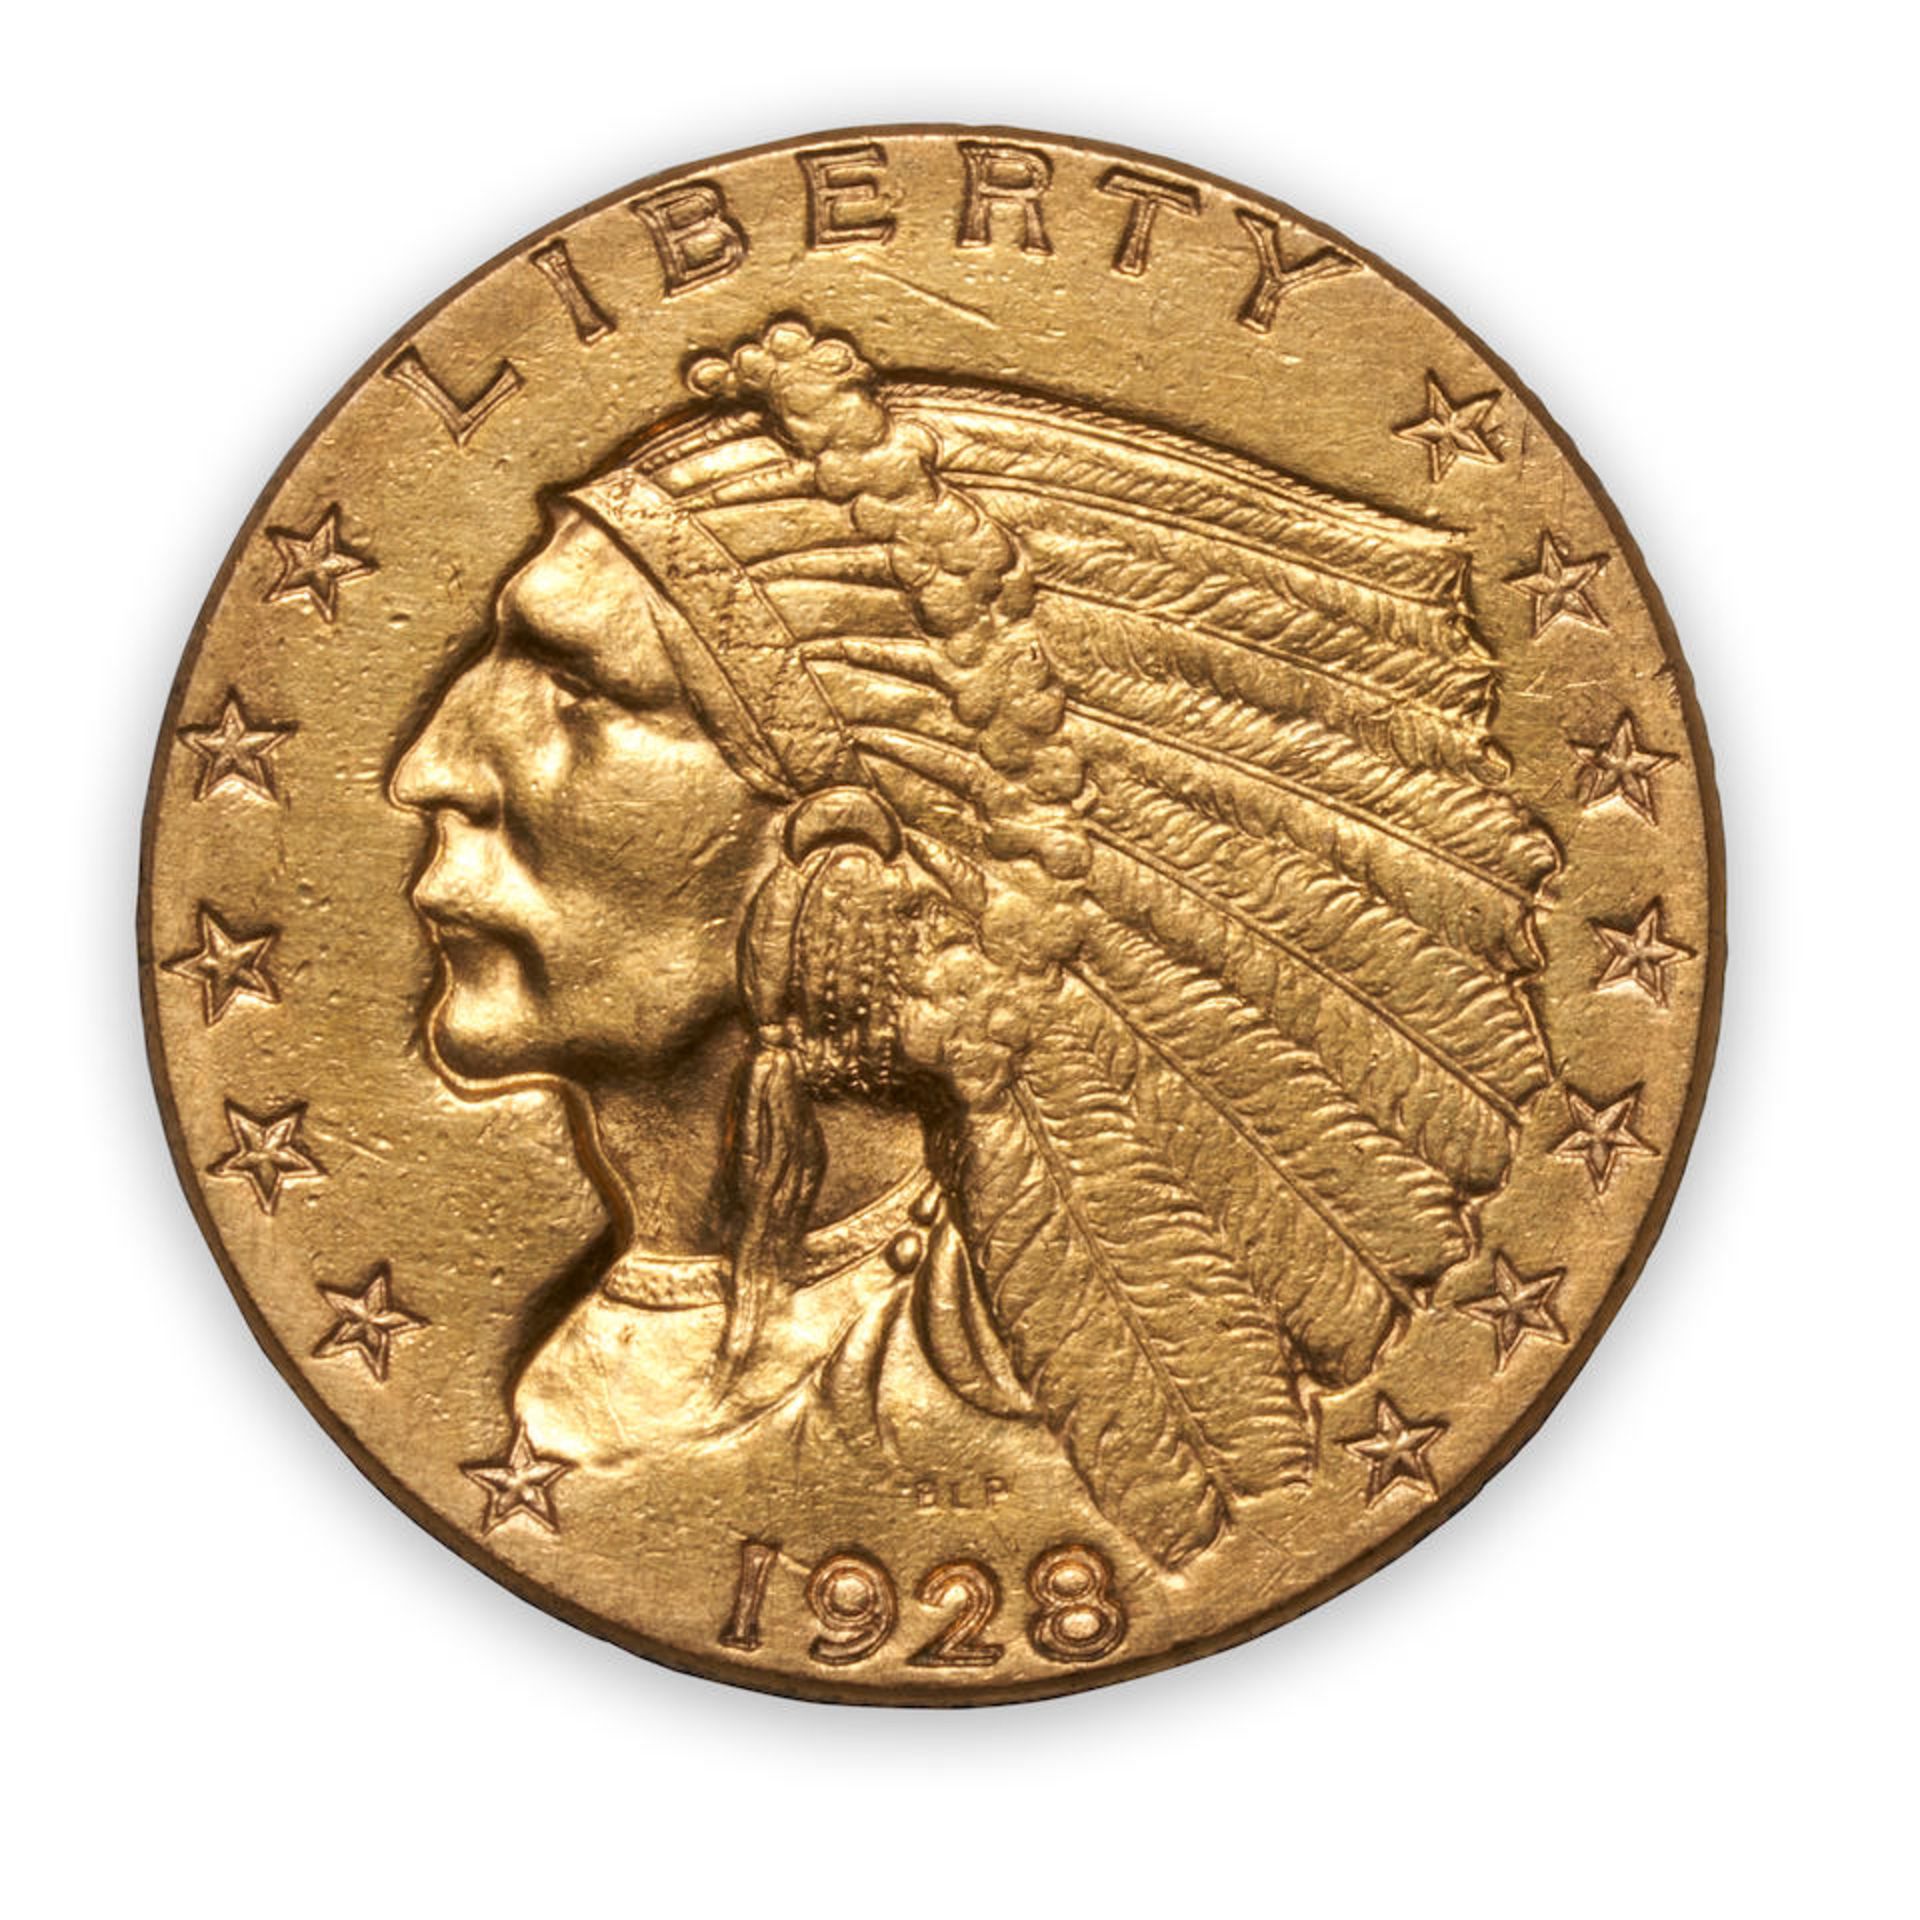 United States Four Indian Head $2.50 Quarter Eagle Gold Coins. - Image 5 of 9